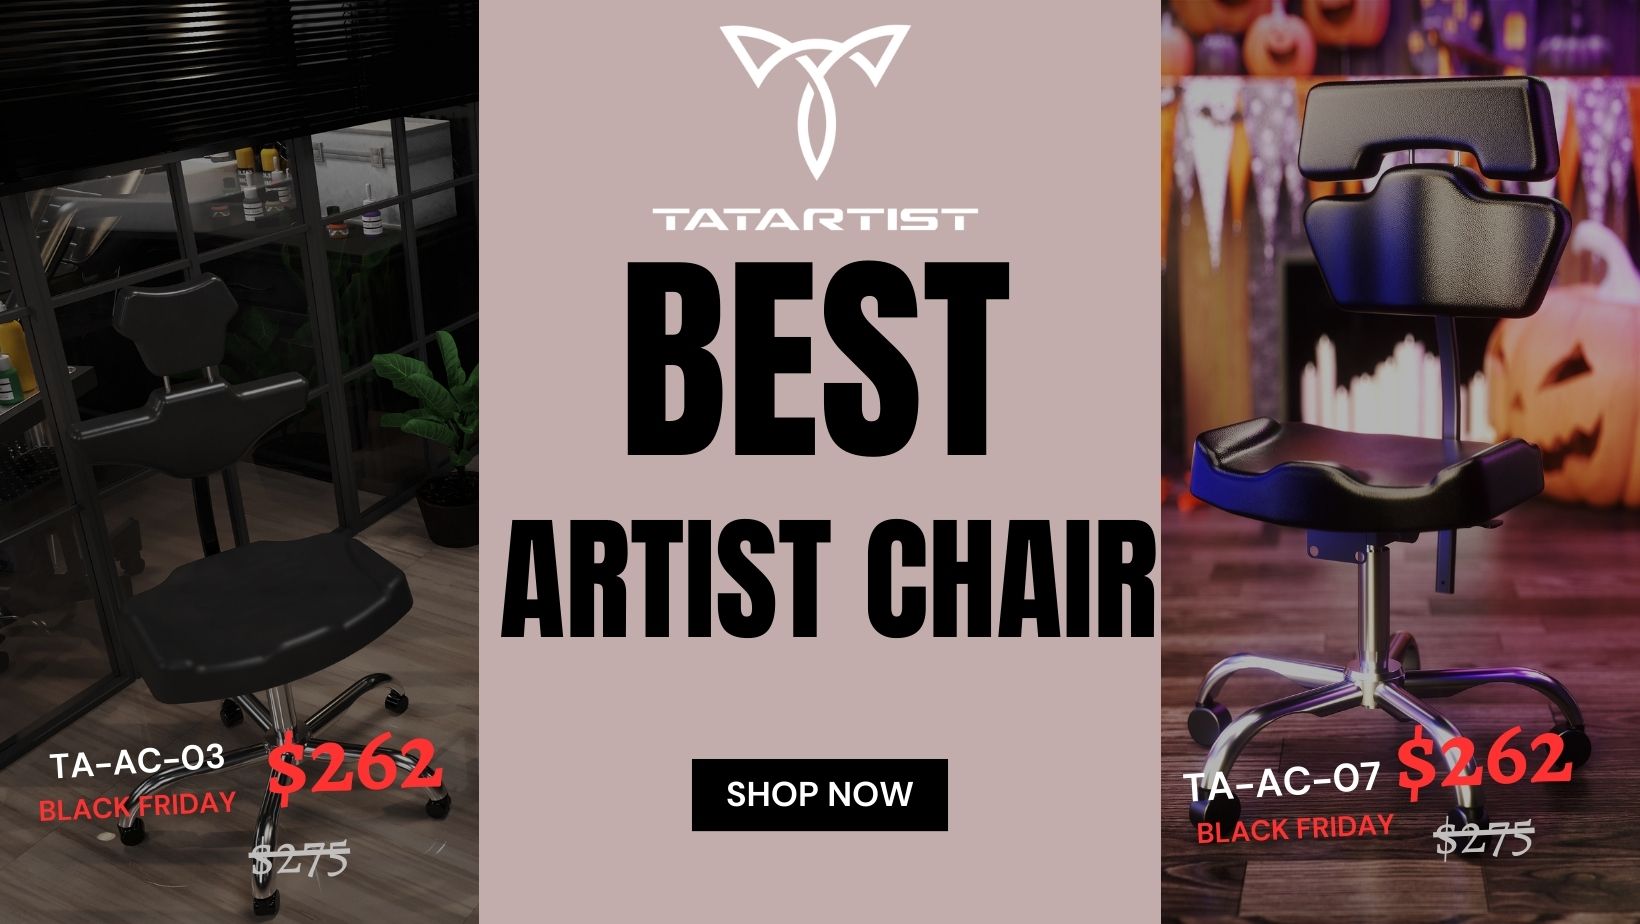 How to choose a comfortable tattoo artist chair?